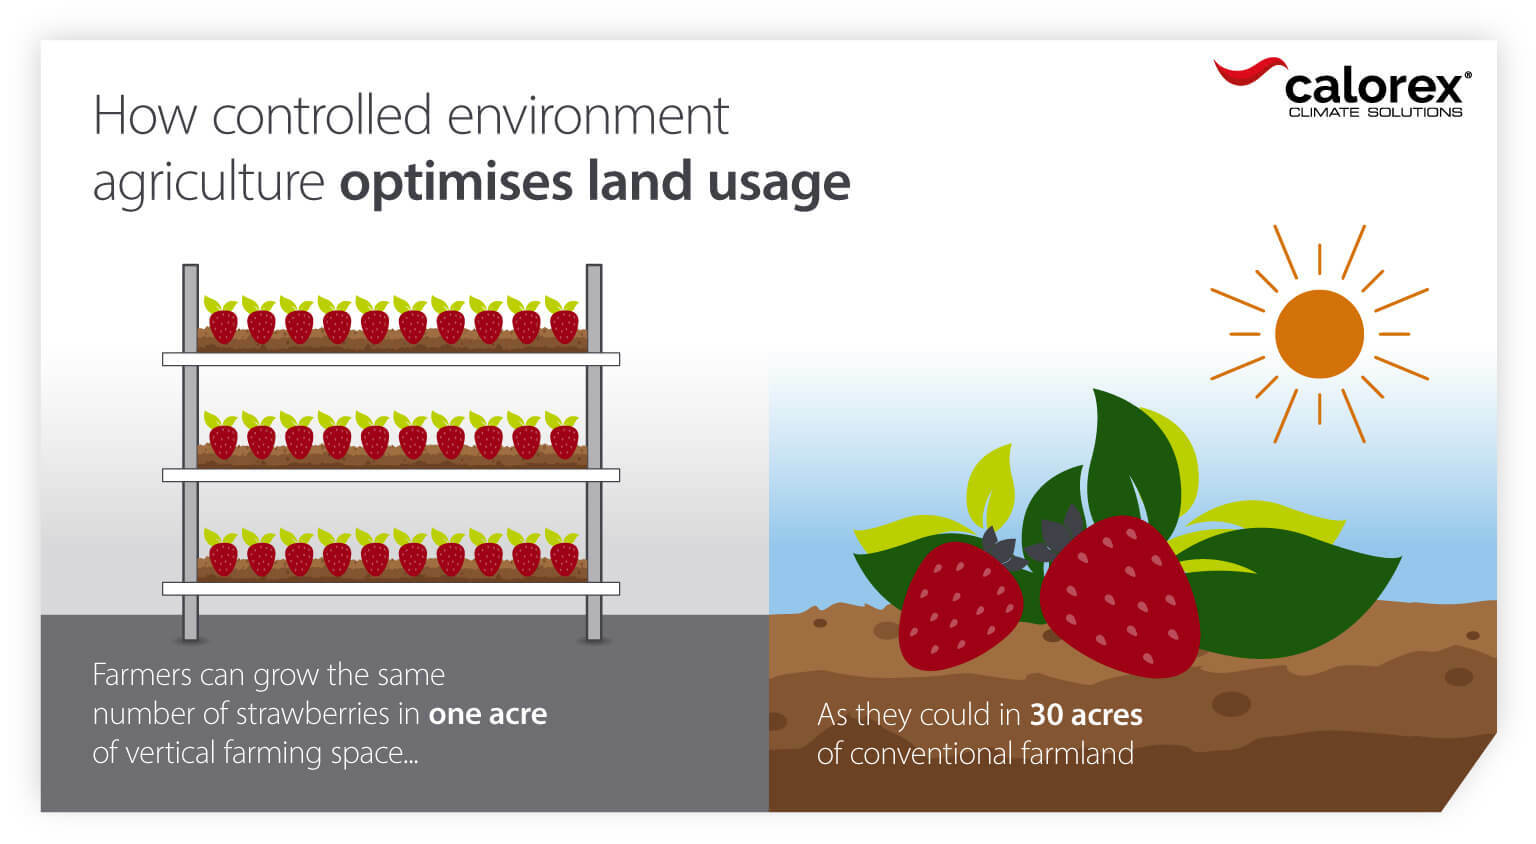 How controlled environment agriculture optimises land use for production and sustainability